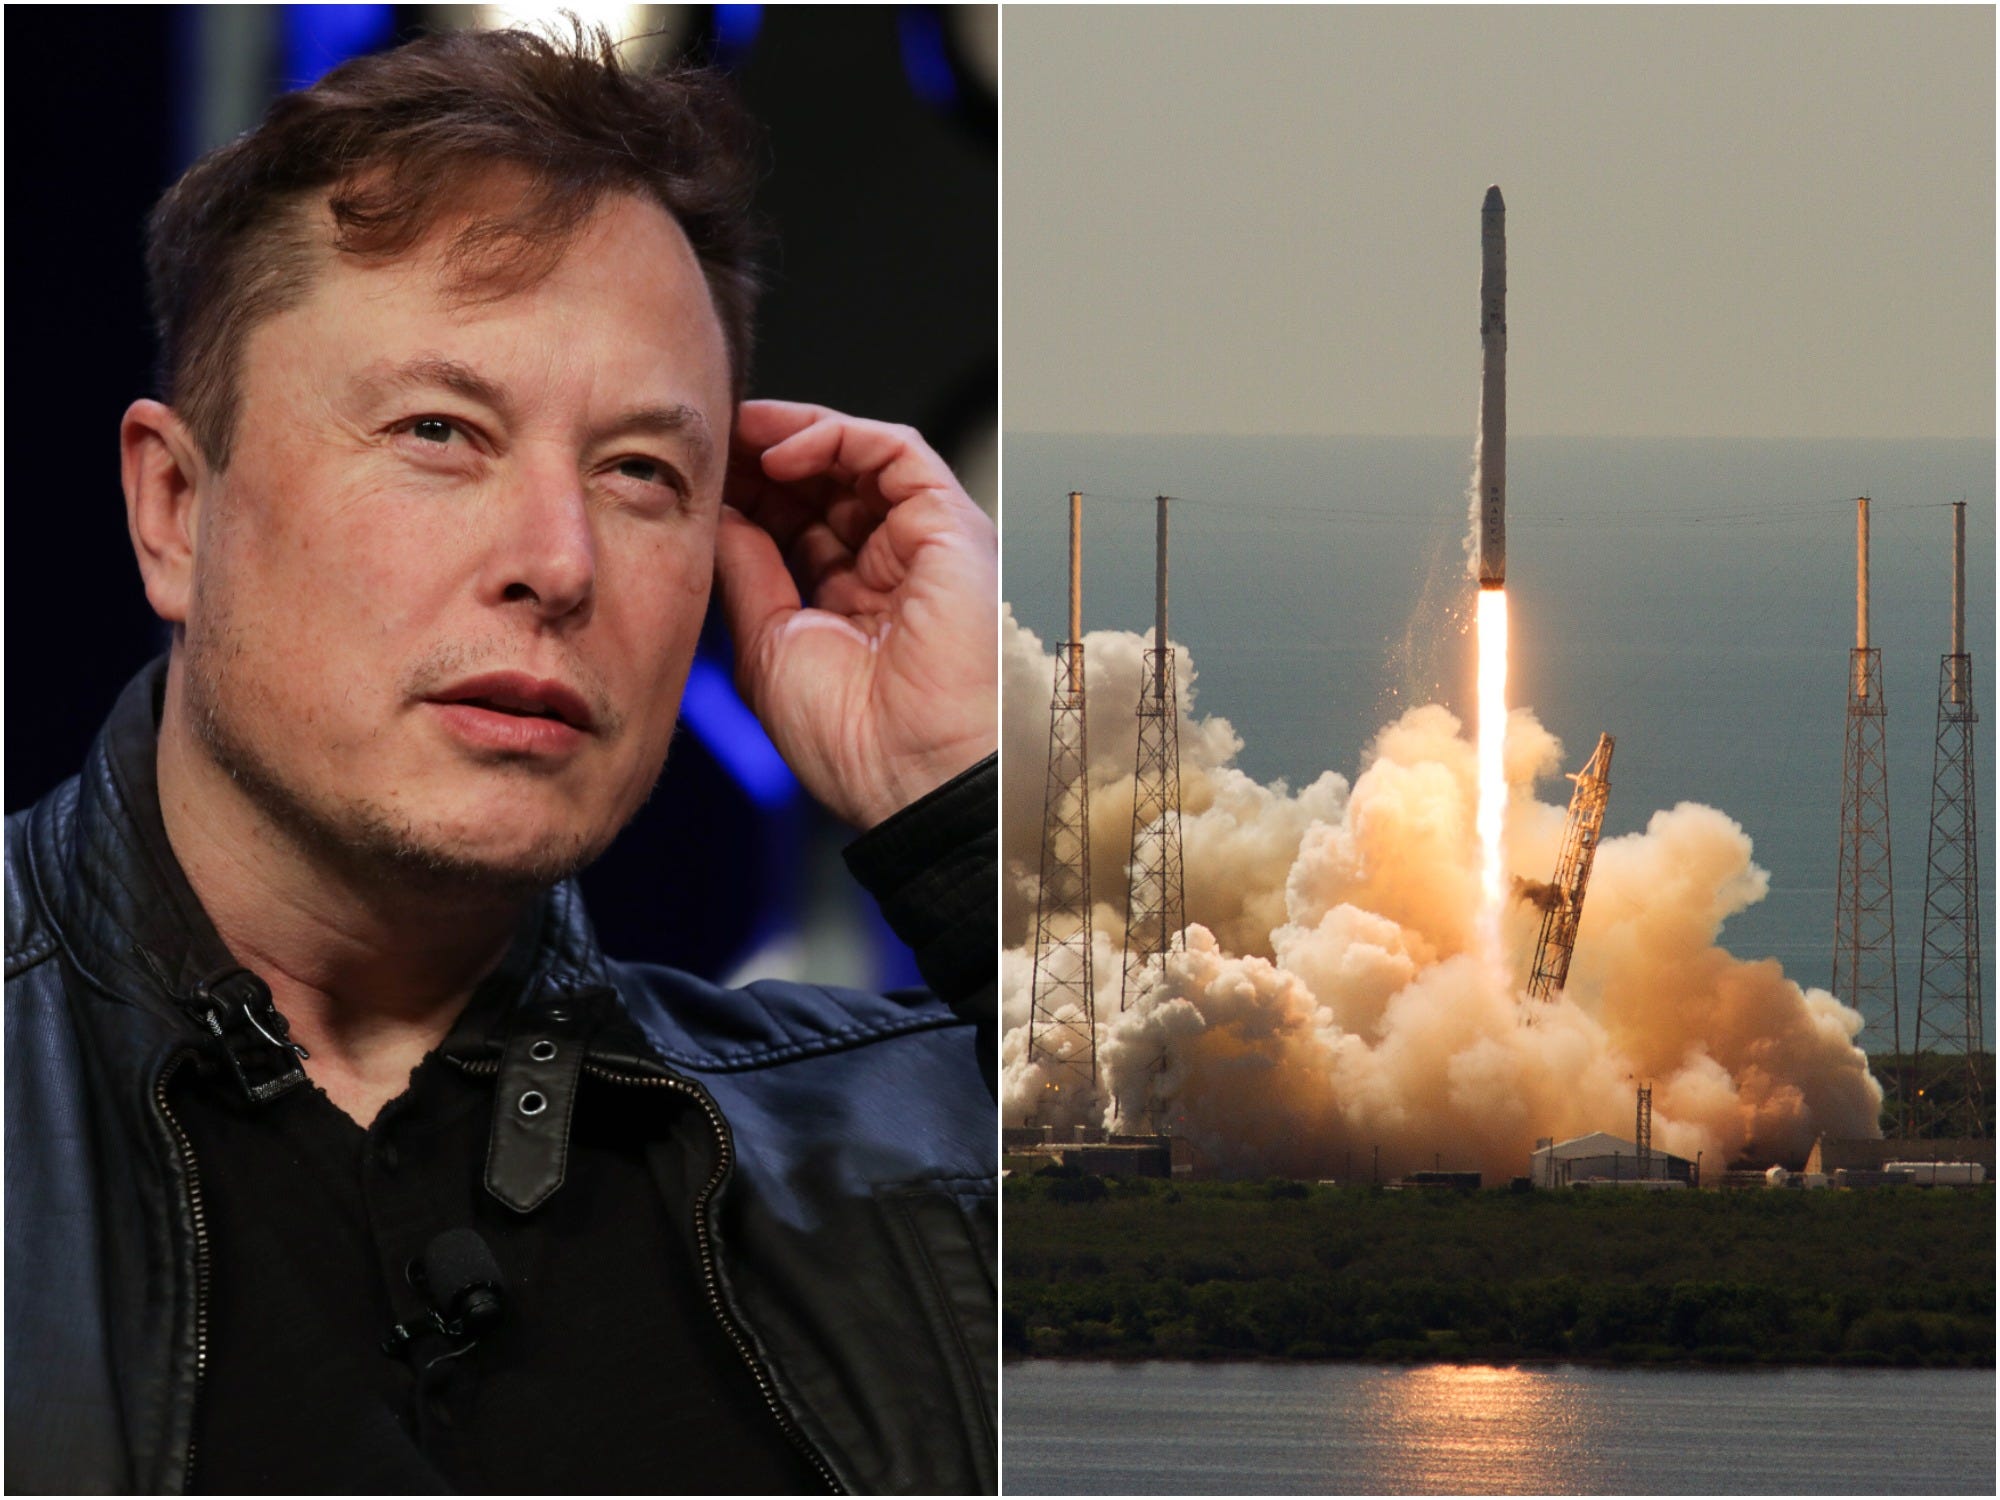 SpaceX CEO Elon Musk next to rocket launch